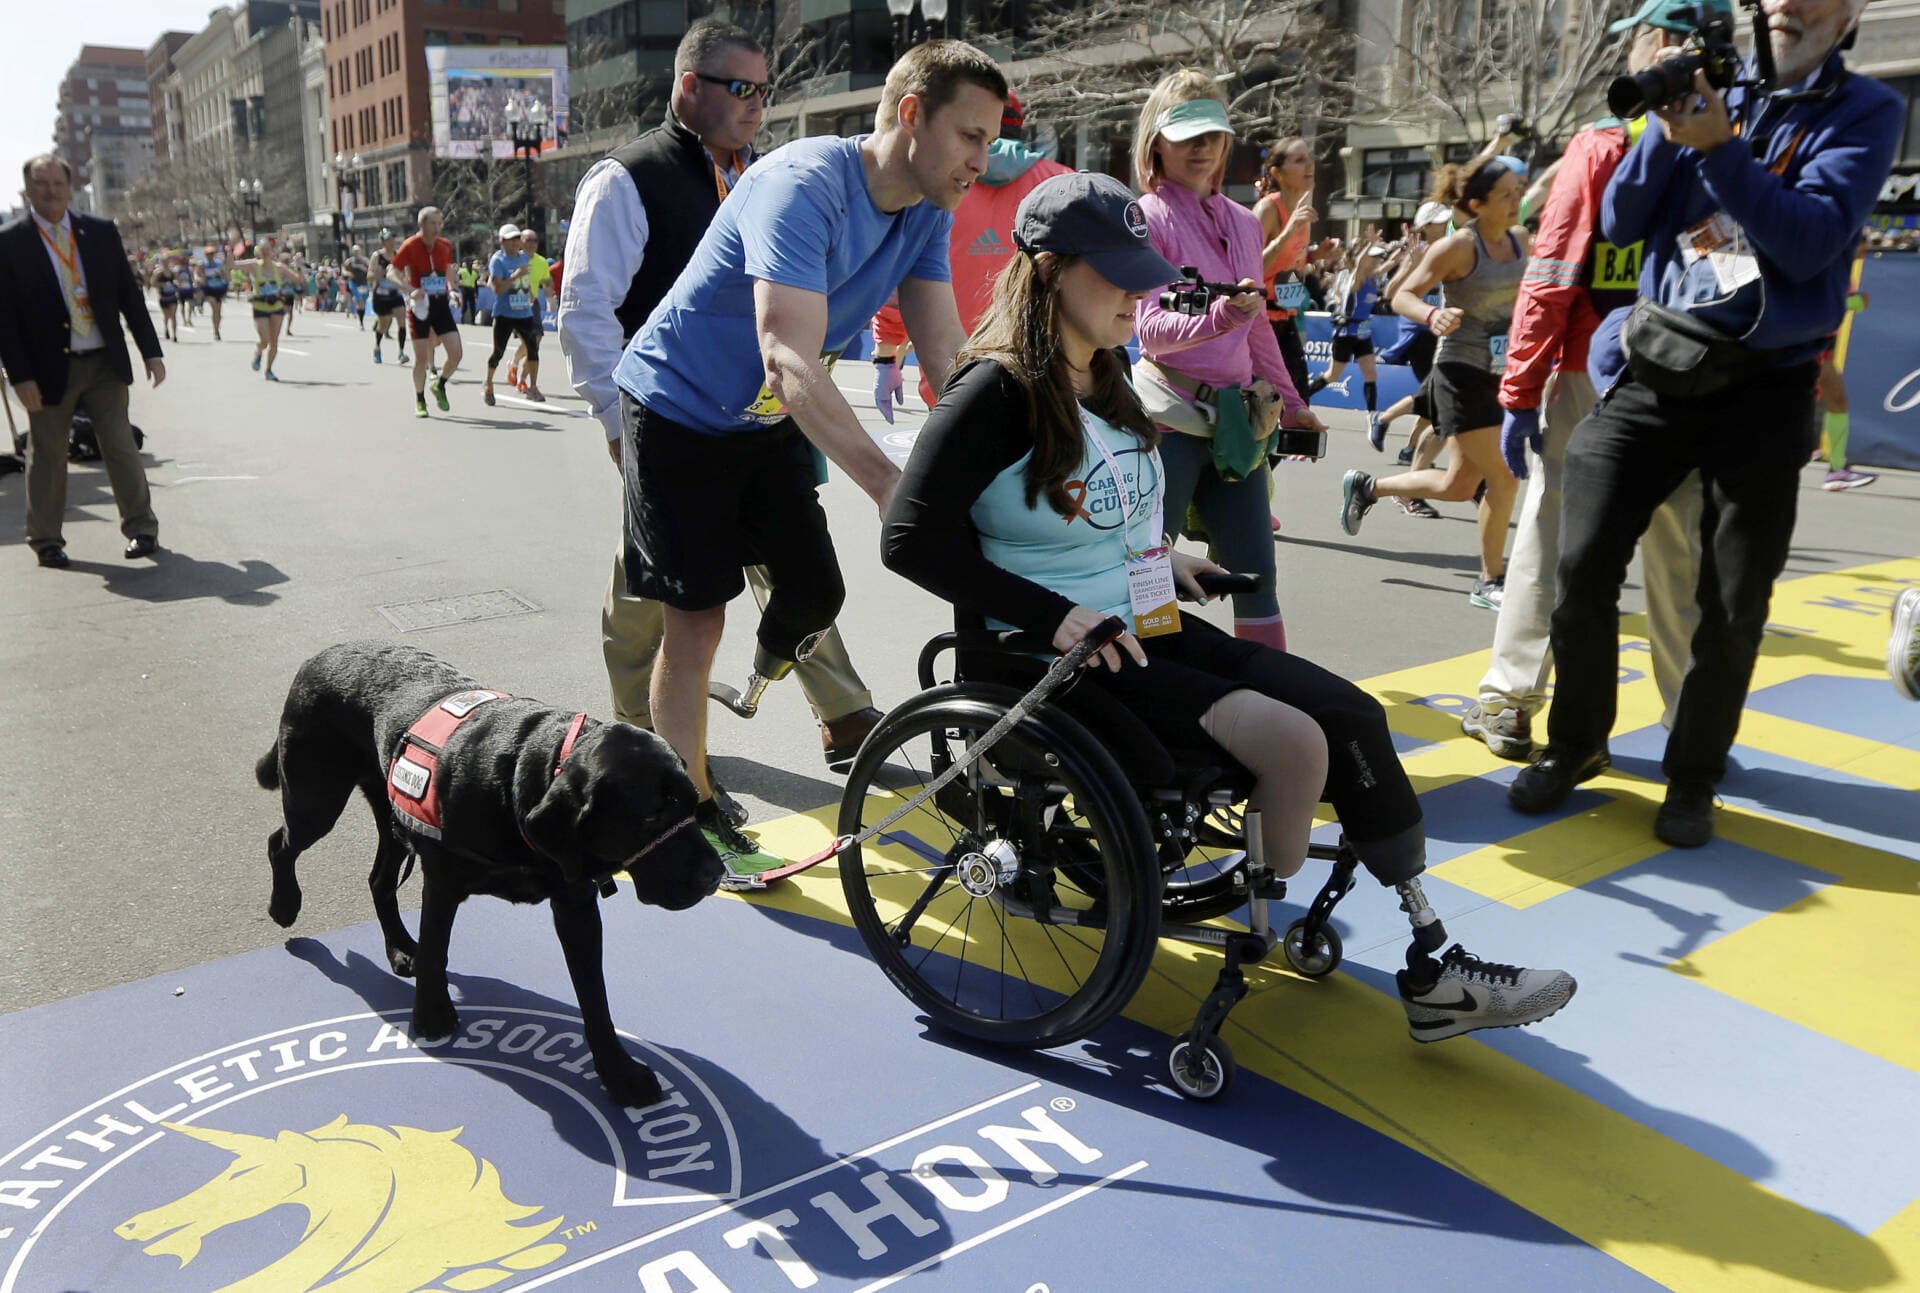 10 years after the Boston Marathon bombings, here's how these survivors